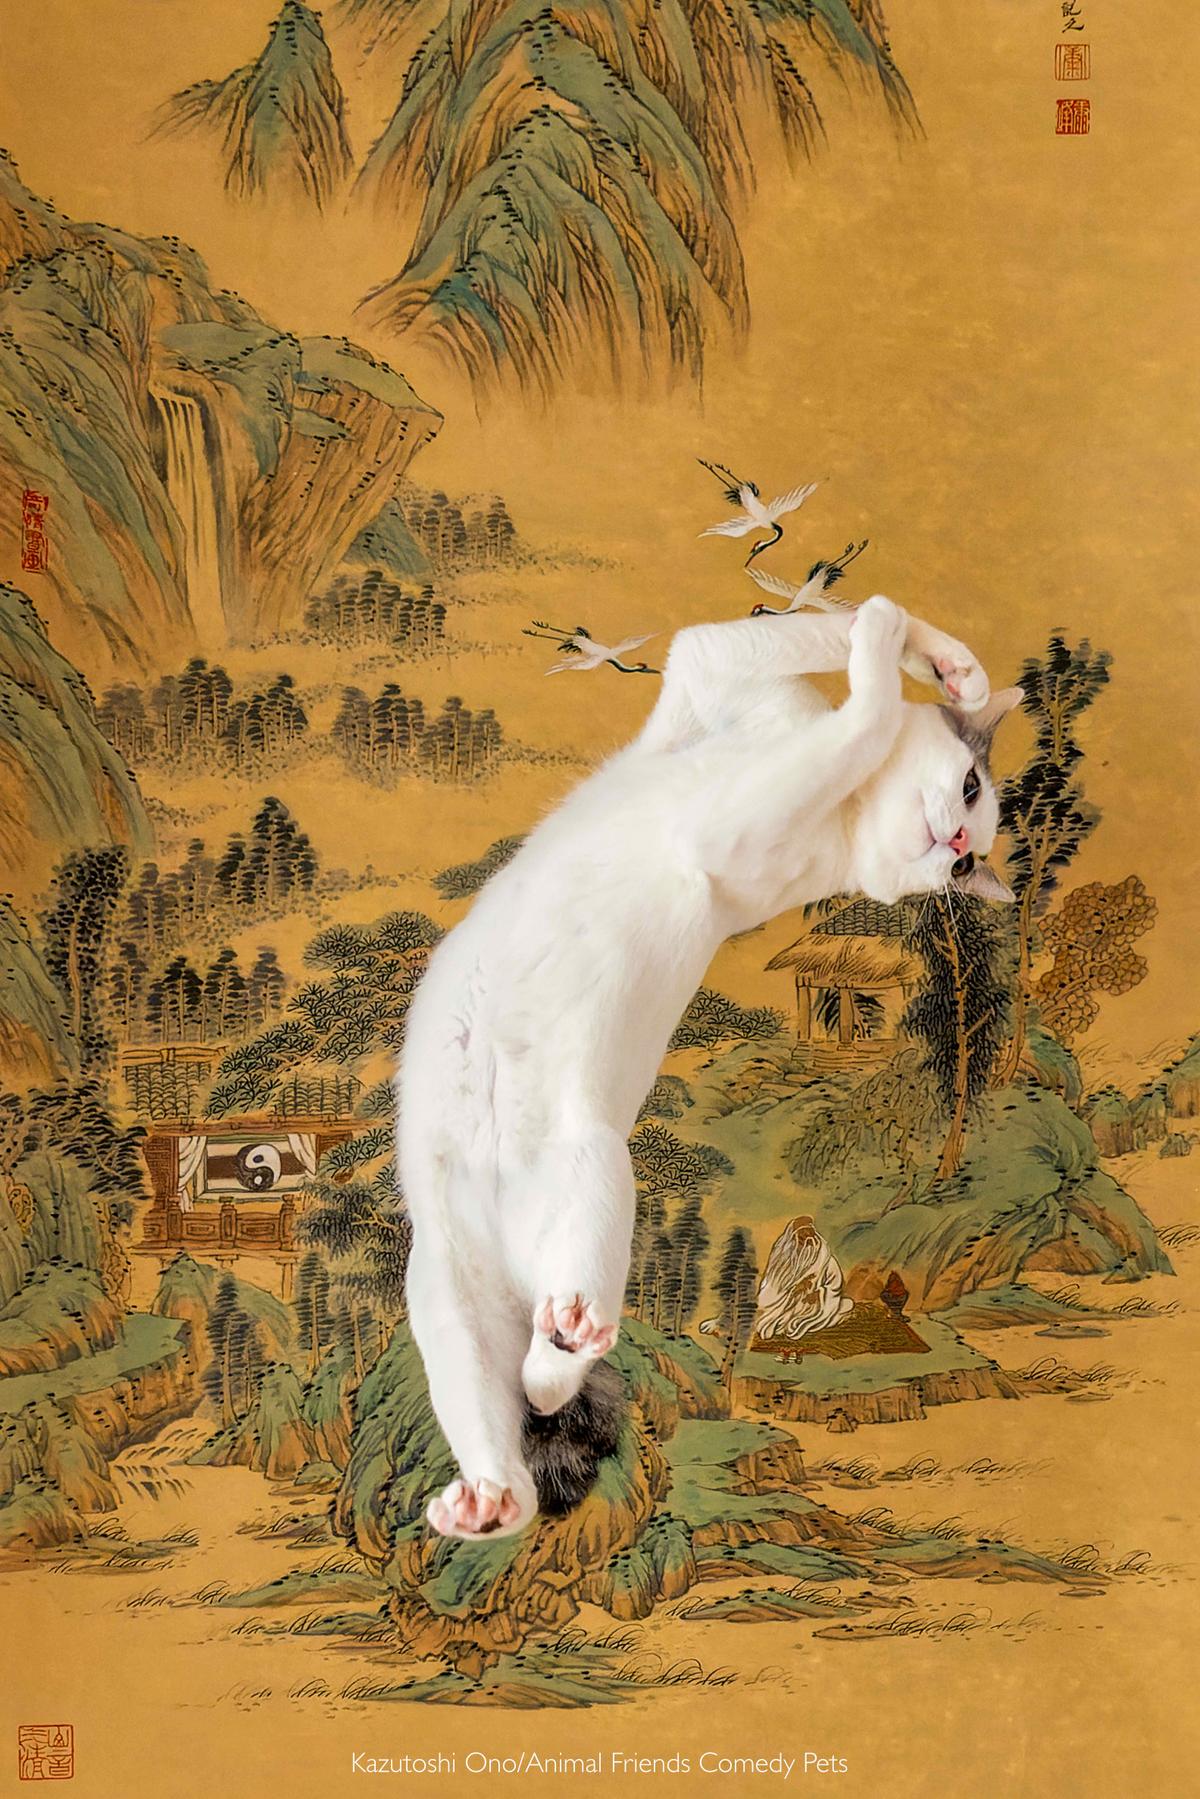 "He is my lovely kitty that is rescued from my local cat care facility. I wanted to create some Japanese image with my kitty so that I made him jumping behind a hanging scroll using a cat toys. It reminds me that there is a famous Japanese story 'Tiger is popping out folding screen’" (Courtesy of Kazutoshi Ono/<a href="https://www.facebook.com/AnimalFriendsPetInsurance">Animal Friends Comedy Pets</a>)